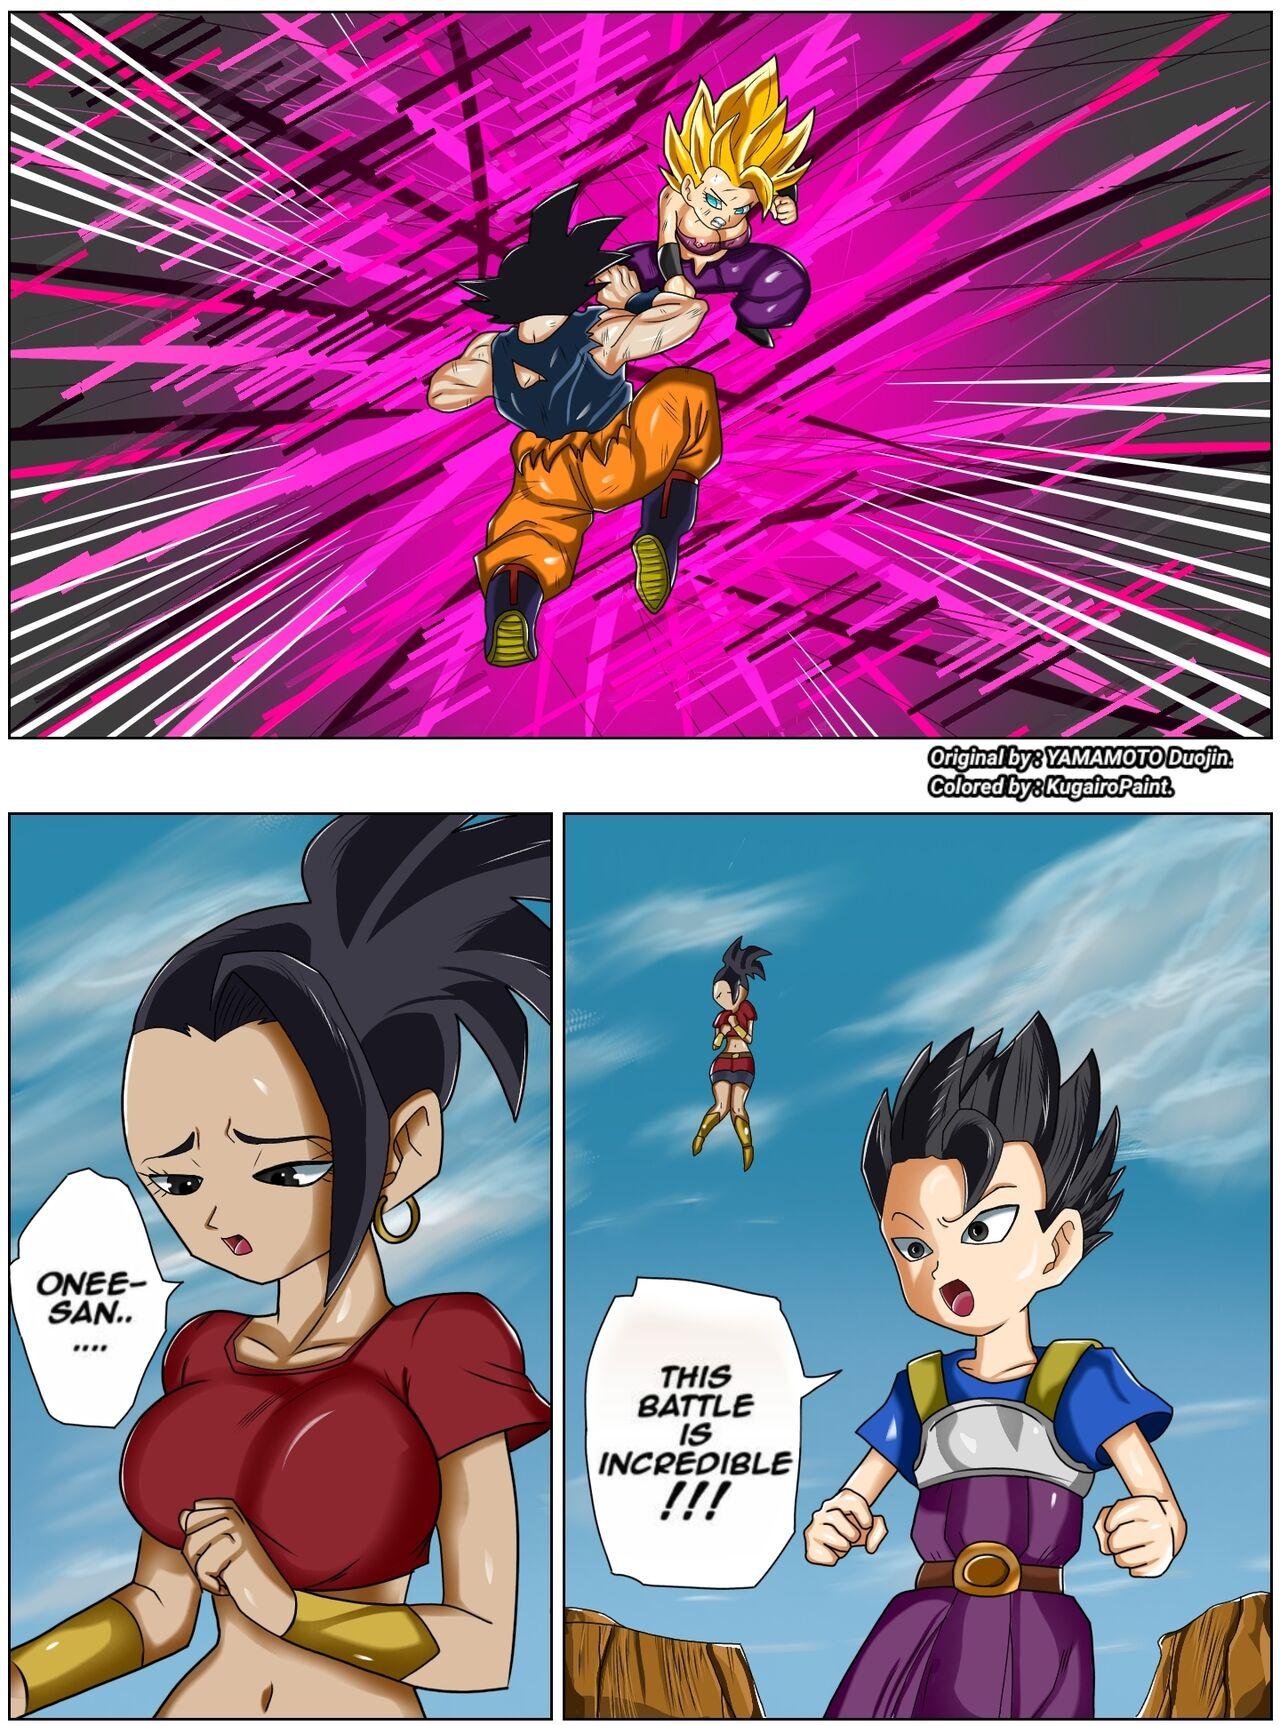 Viet Fight in the 6th Universe!! - Dragon ball super Gay Amateur - Page 4